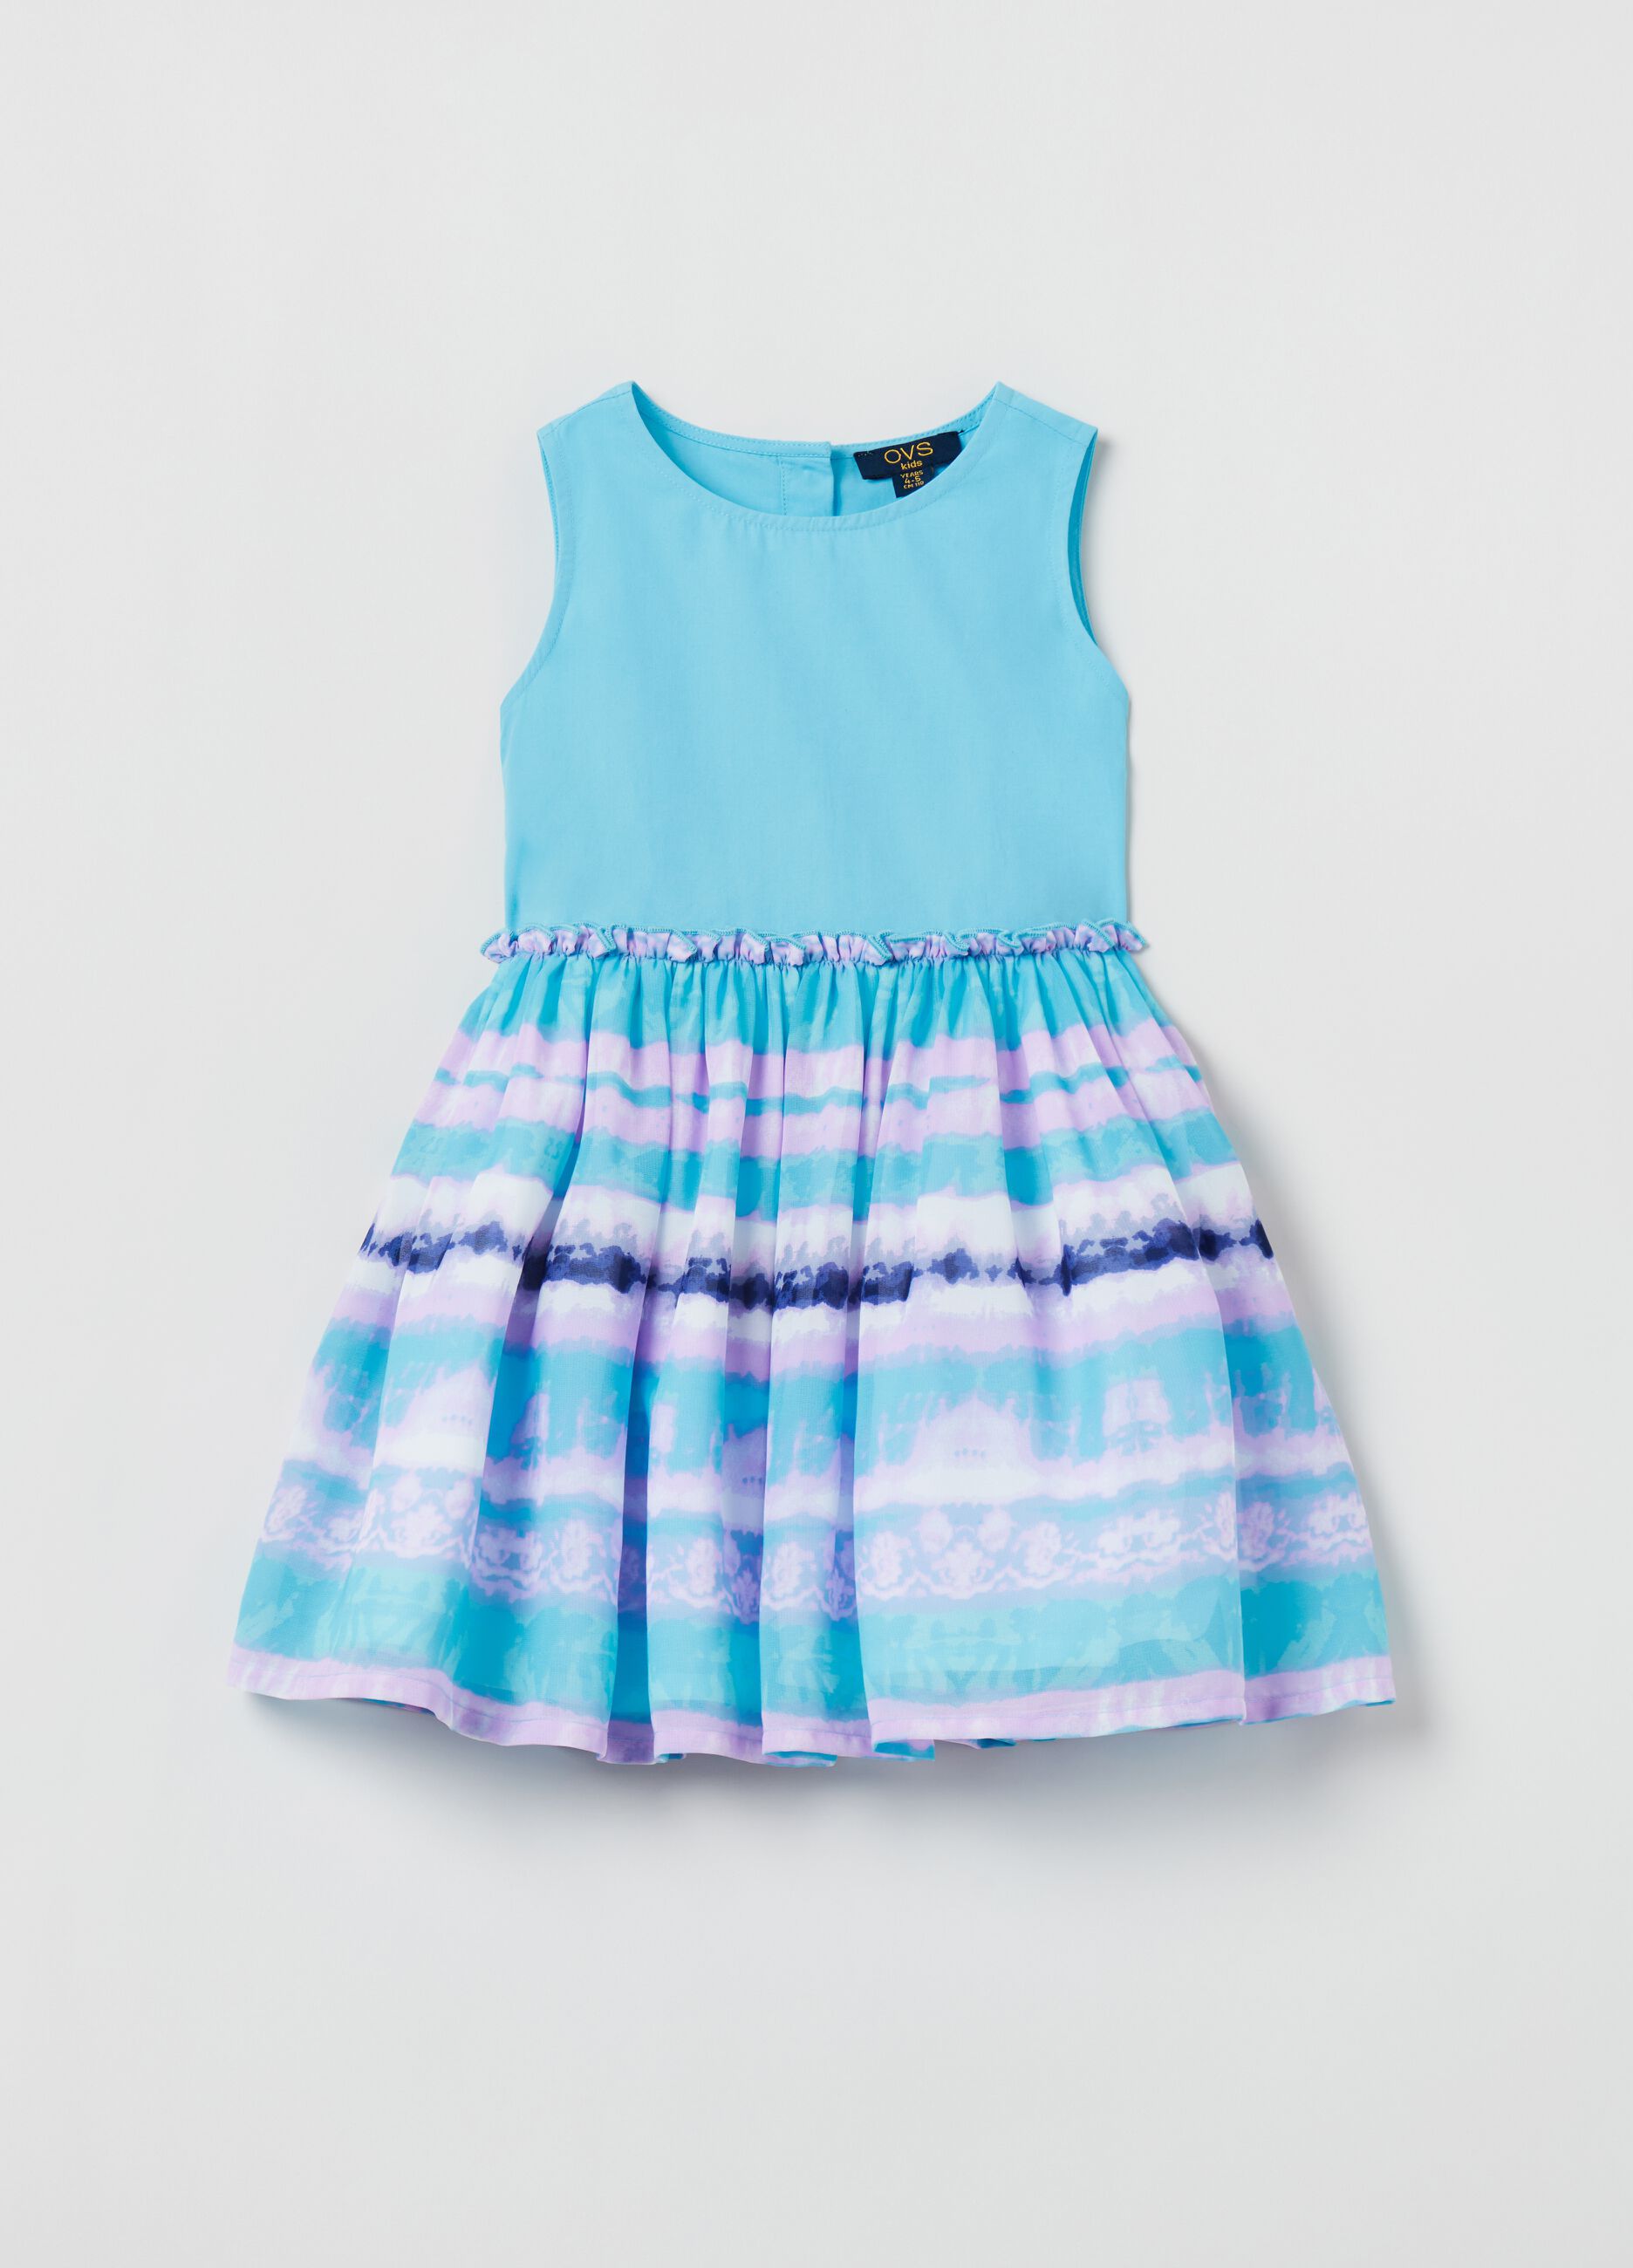 Sleeveless outfit with tie-dye skirt